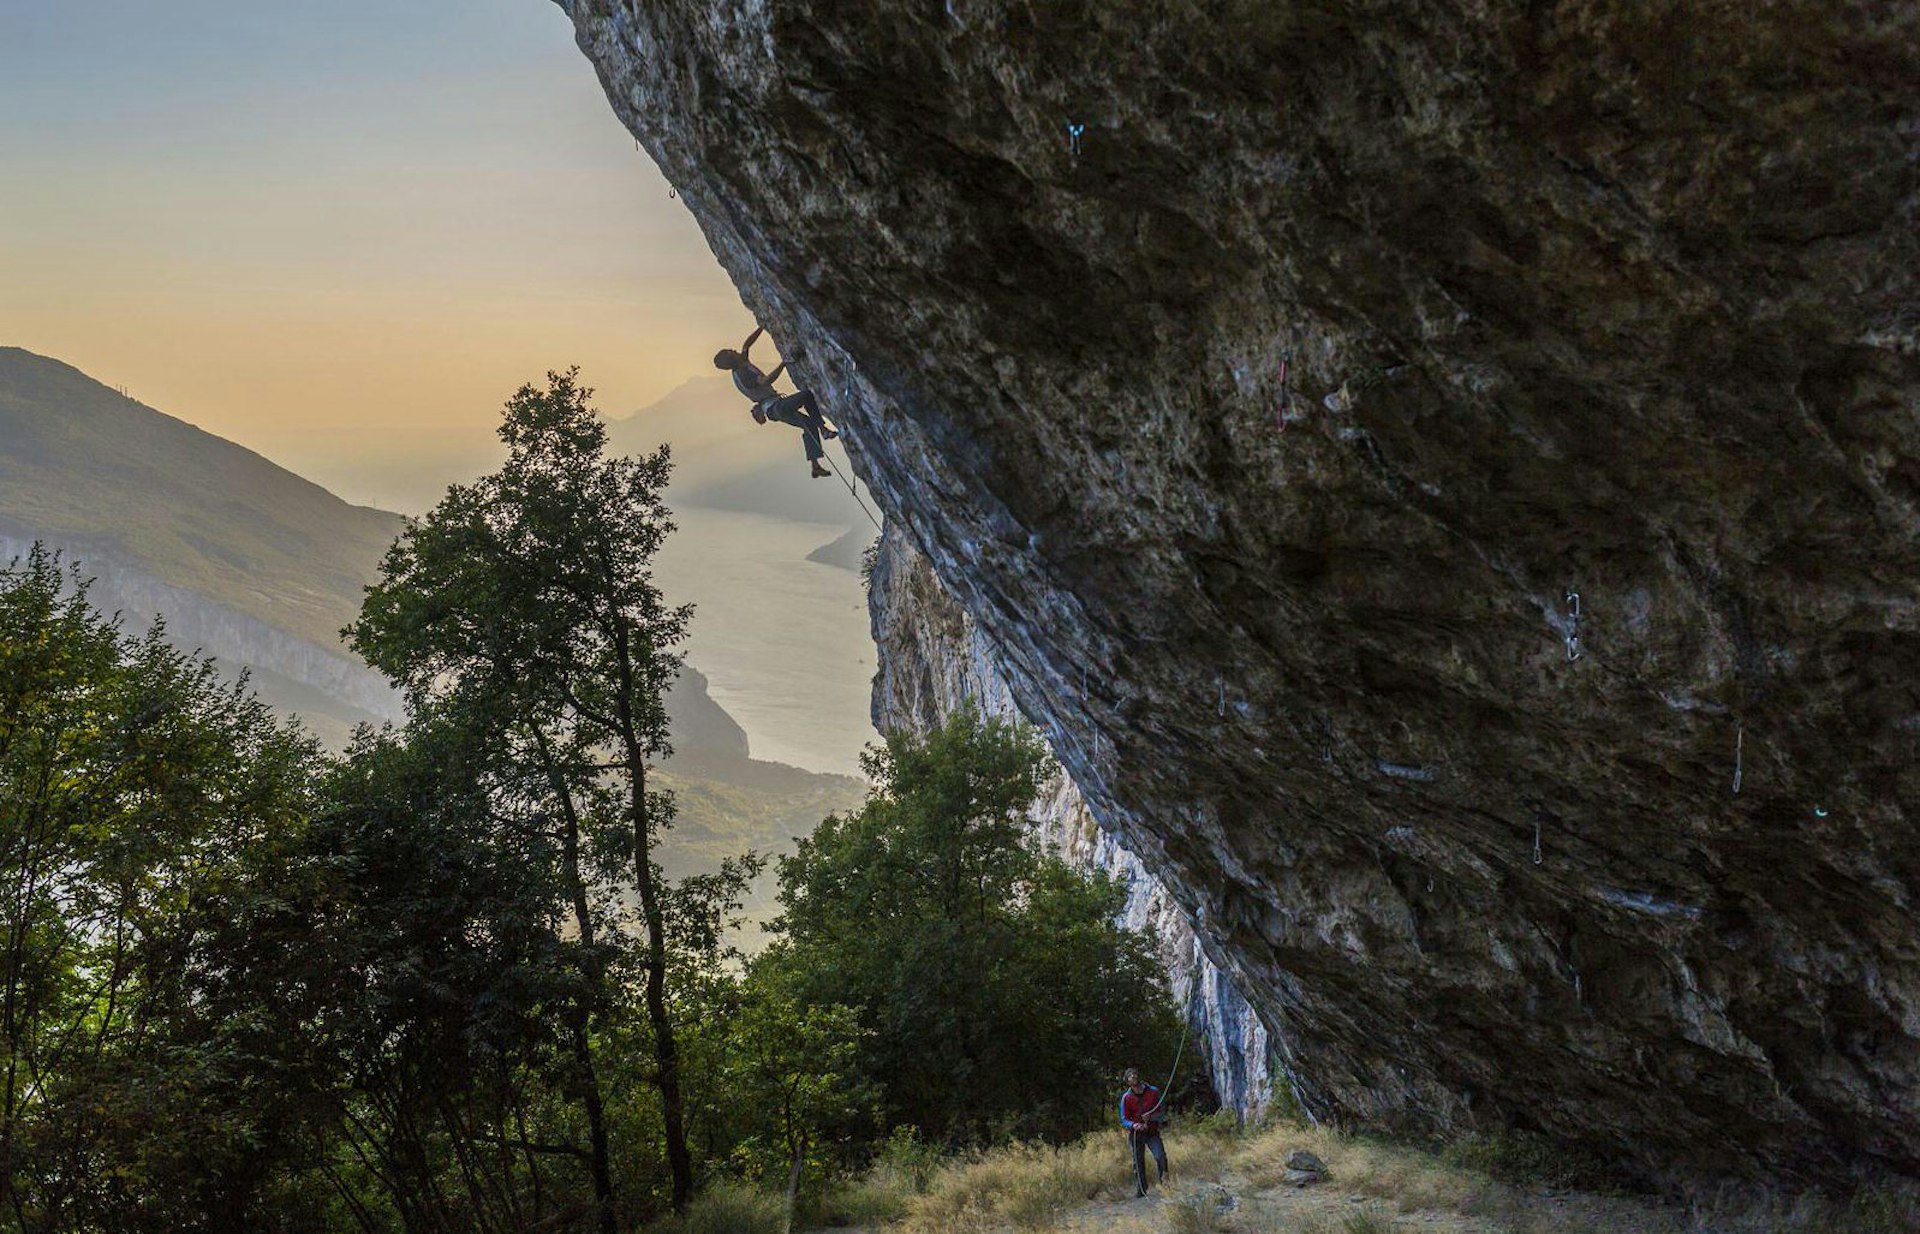 A climber scales an overhanging rockface, with Lake Garda in the distance